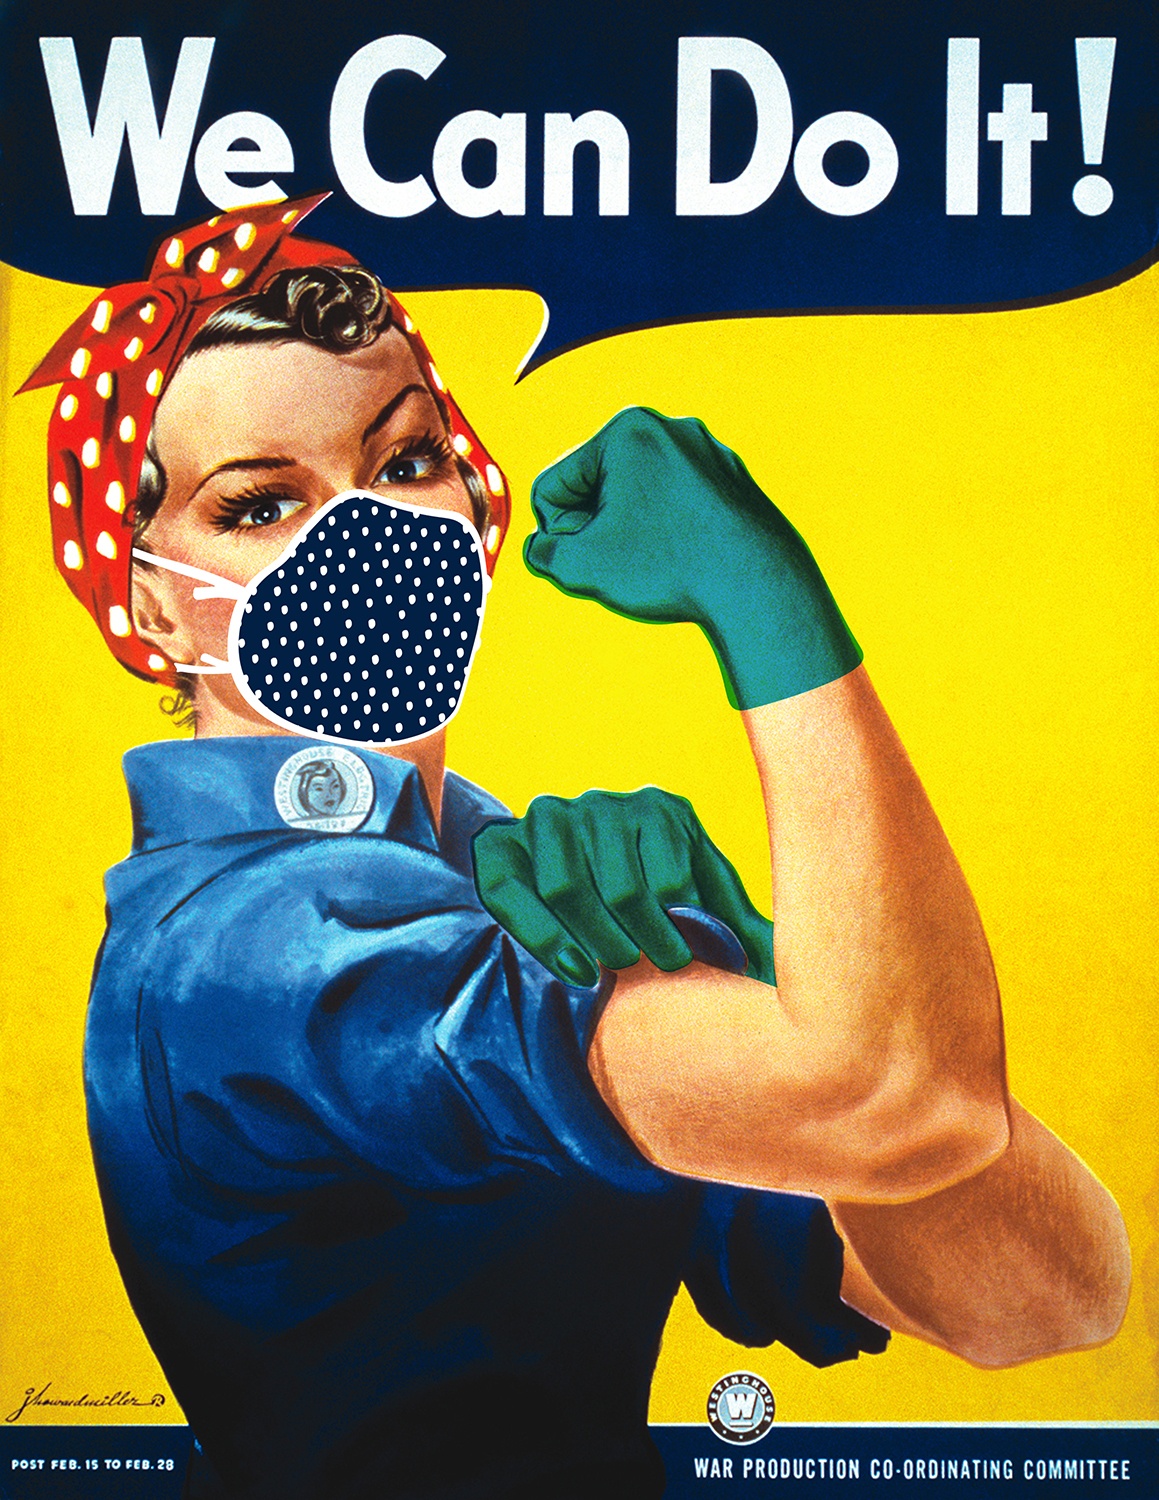 We Can Do It!, COVID-19 Edition. Vintage image of Rosie the Riveter by J. Howard Miller. Courtesy National Museum of American History, Smithsonian Institution.